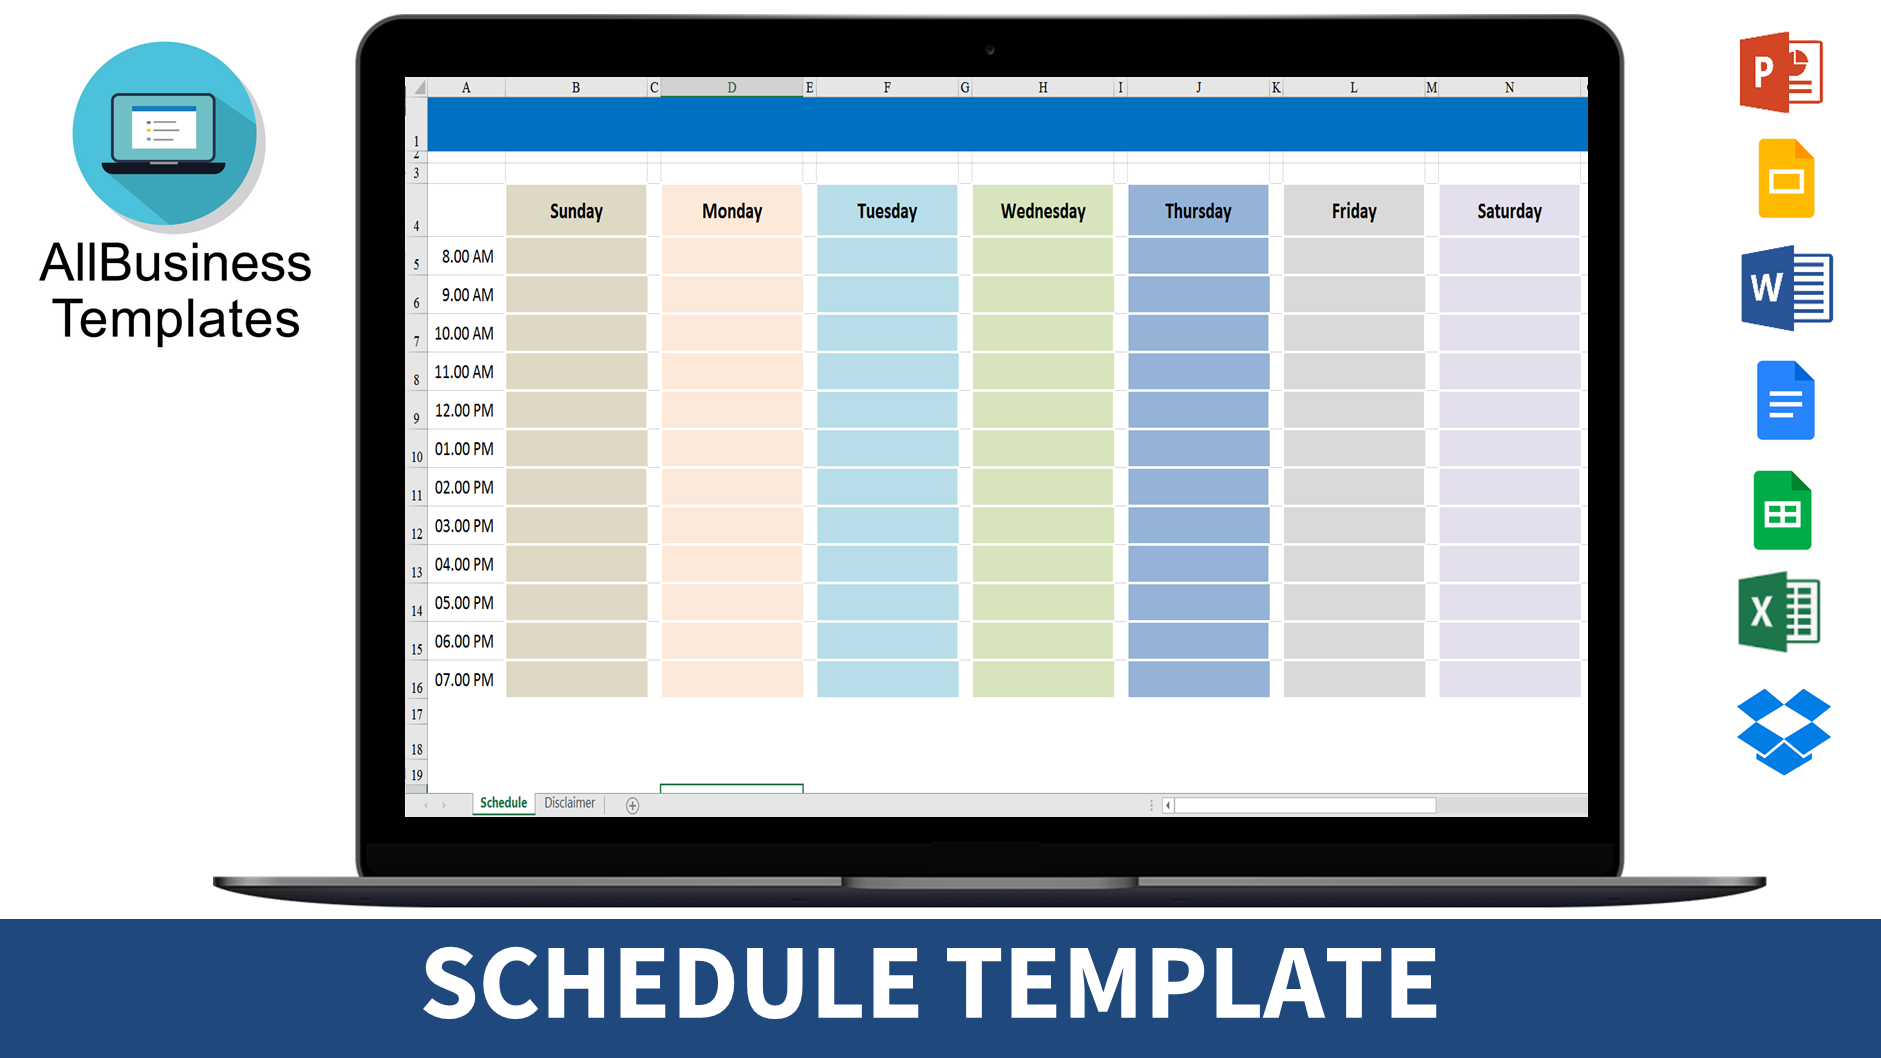 Schedule Template main image